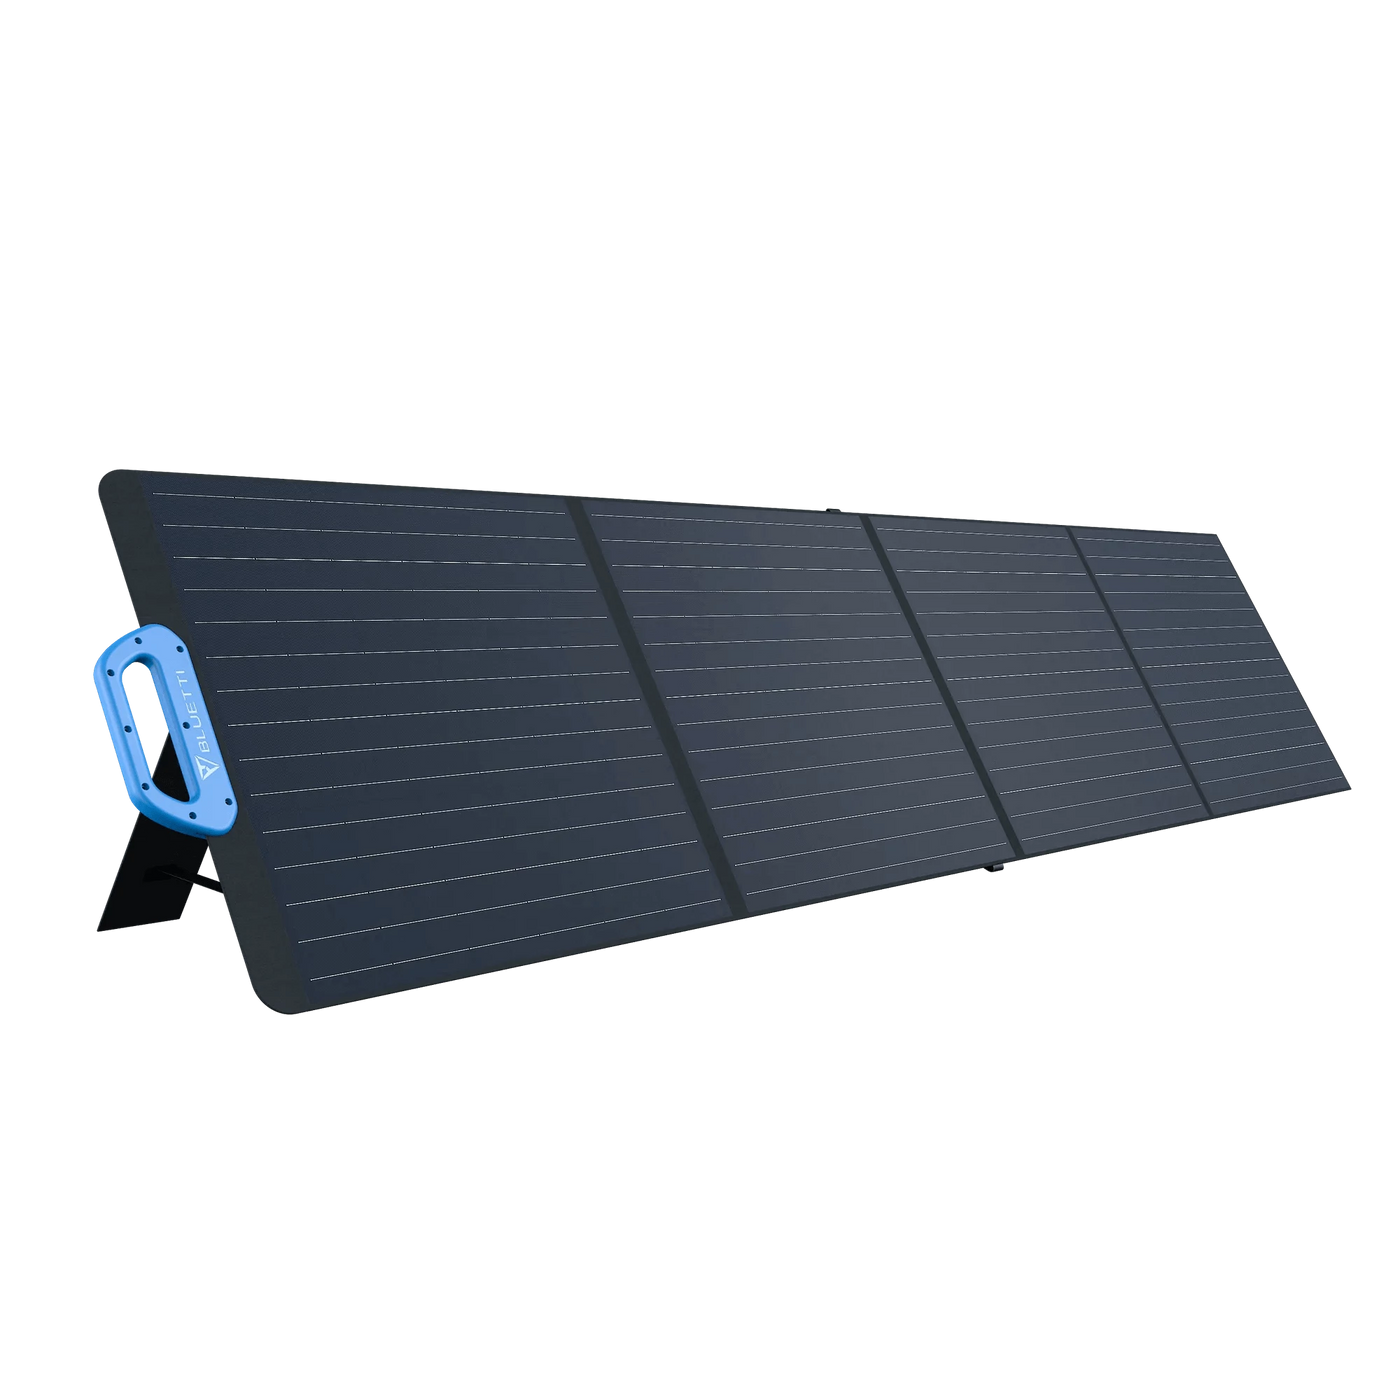 200 Watt Portable Solar Panel: Bluetti PV200 - Front Left View Fully Expanded